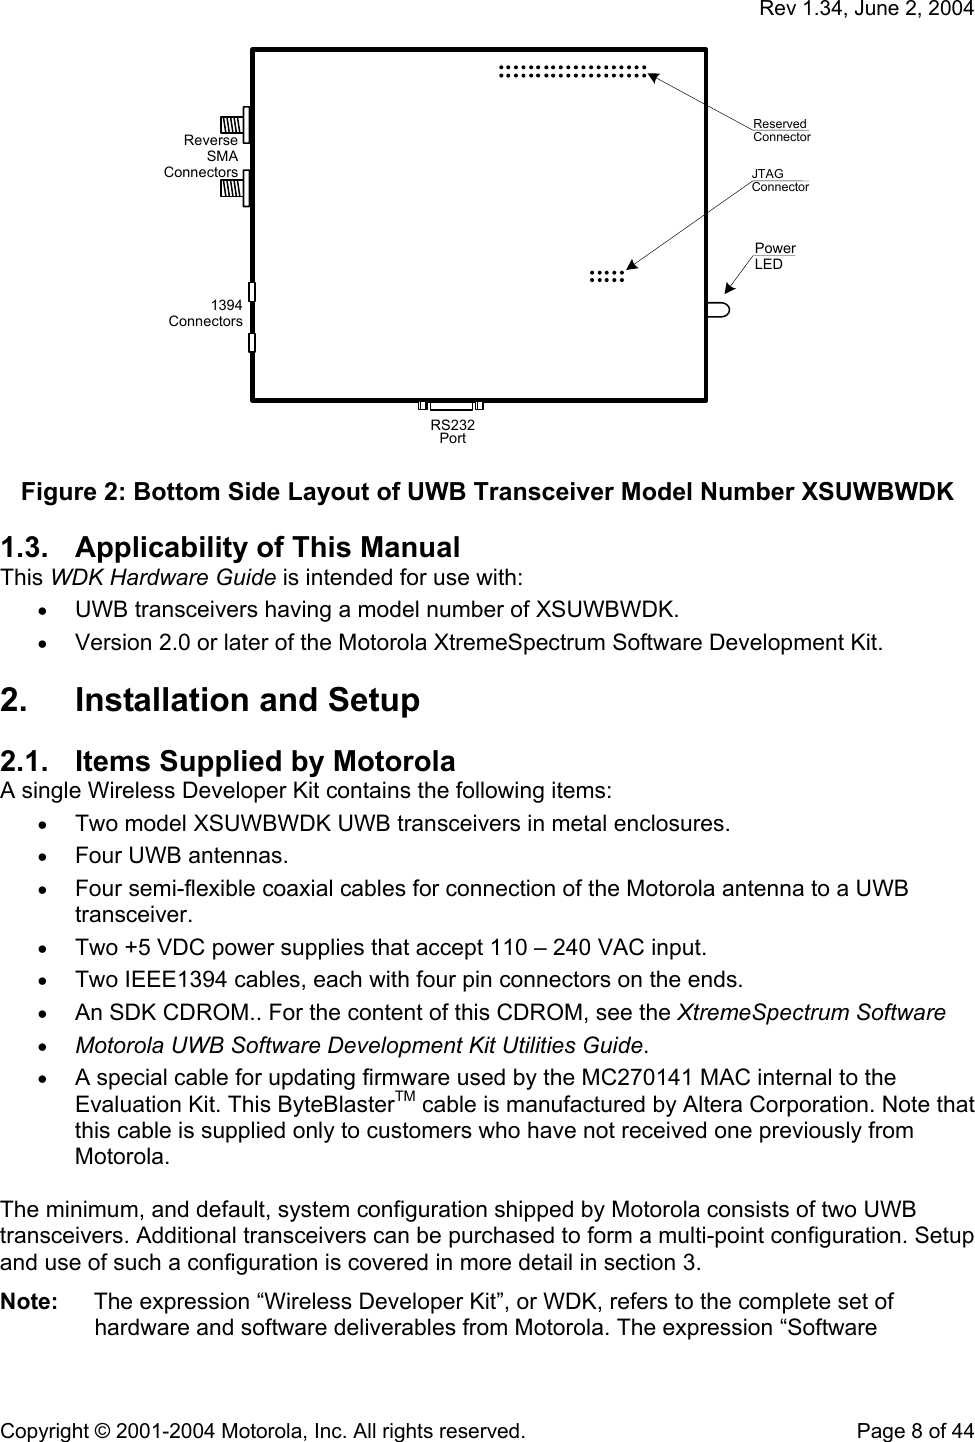   Rev 1.34, June 2, 2004  Copyright © 2001-2004 Motorola, Inc. All rights reserved.    Page 8 of 44 PowerLEDJTAGConnectorReverseSMAConnectors1394ConnectorsRS232PortReservedConnector  Figure 2: Bottom Side Layout of UWB Transceiver Model Number XSUWBWDK 1.3.  Applicability of This Manual This WDK Hardware Guide is intended for use with: • UWB transceivers having a model number of XSUWBWDK. • Version 2.0 or later of the Motorola XtremeSpectrum Software Development Kit.  2.  Installation and Setup 2.1.  Items Supplied by Motorola A single Wireless Developer Kit contains the following items: • Two model XSUWBWDK UWB transceivers in metal enclosures.  • Four UWB antennas. • Four semi-flexible coaxial cables for connection of the Motorola antenna to a UWB transceiver. • Two +5 VDC power supplies that accept 110 – 240 VAC input. • Two IEEE1394 cables, each with four pin connectors on the ends. • An SDK CDROM.. For the content of this CDROM, see the XtremeSpectrum Software  • Motorola UWB Software Development Kit Utilities Guide. • A special cable for updating firmware used by the MC270141 MAC internal to the Evaluation Kit. This ByteBlasterTM cable is manufactured by Altera Corporation. Note that this cable is supplied only to customers who have not received one previously from Motorola.  The minimum, and default, system configuration shipped by Motorola consists of two UWB transceivers. Additional transceivers can be purchased to form a multi-point configuration. Setup and use of such a configuration is covered in more detail in section 3. Note:  The expression “Wireless Developer Kit”, or WDK, refers to the complete set of hardware and software deliverables from Motorola. The expression “Software 